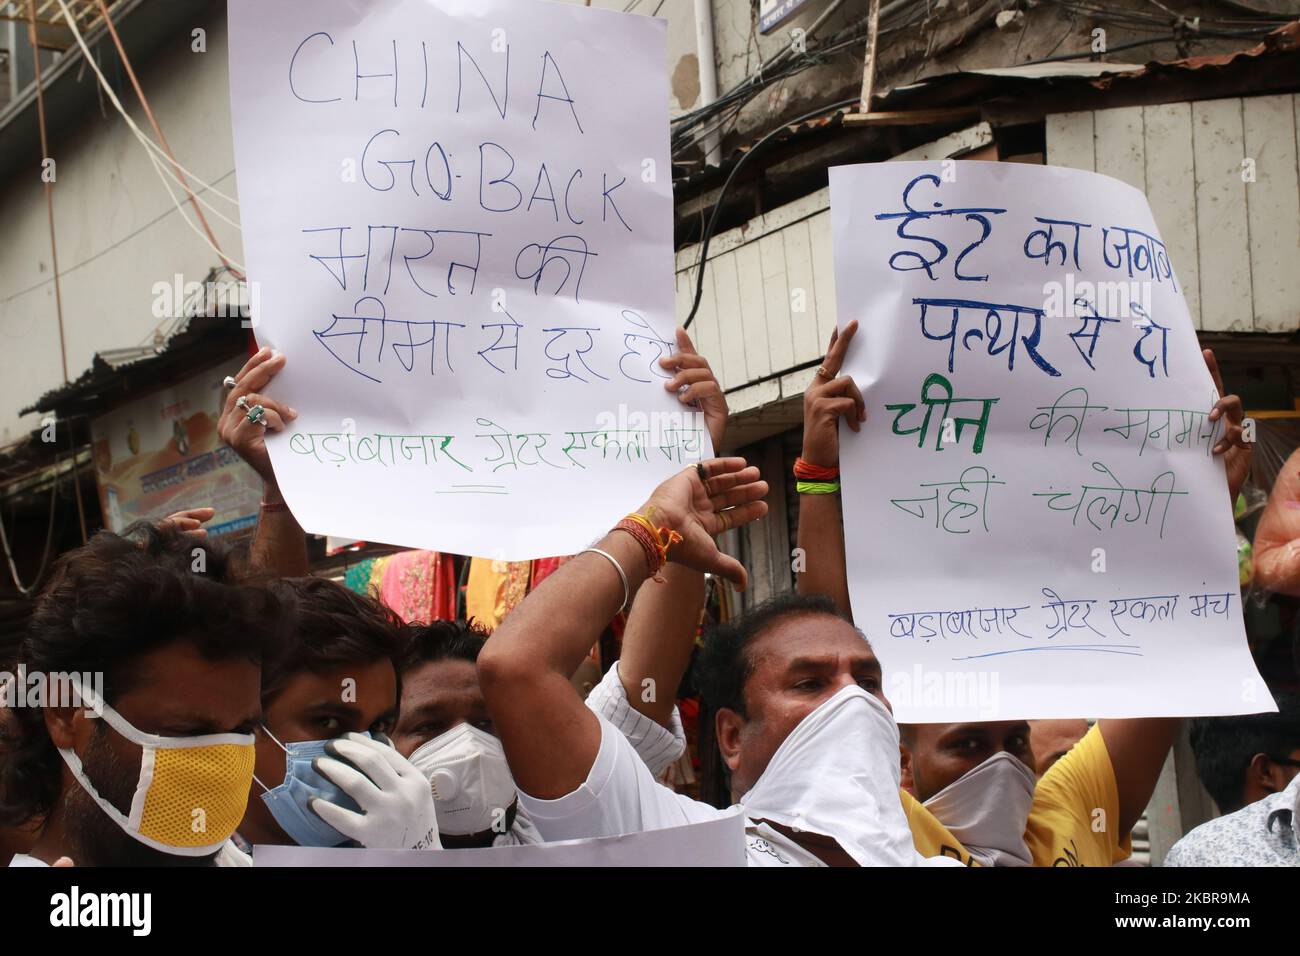 People protest and burn made in china toys and others goods and boycott shale any made in china goods during a protest against the Chinese government in Kolkata, India, on June 17, 2020. As some commentators clamored for revenge, India's government was silent Wednesday on the fallout from clashes with China's army in a disputed border area in the high Himalayas that the Indian army said claimed 20 soldiers' lives. An official Communist Party newspaper said the clash occurred because India misjudged the Chinese army's strength and willingness to respond. (Photo by Debajyoti Chakraborty/NurPhoto Stock Photo